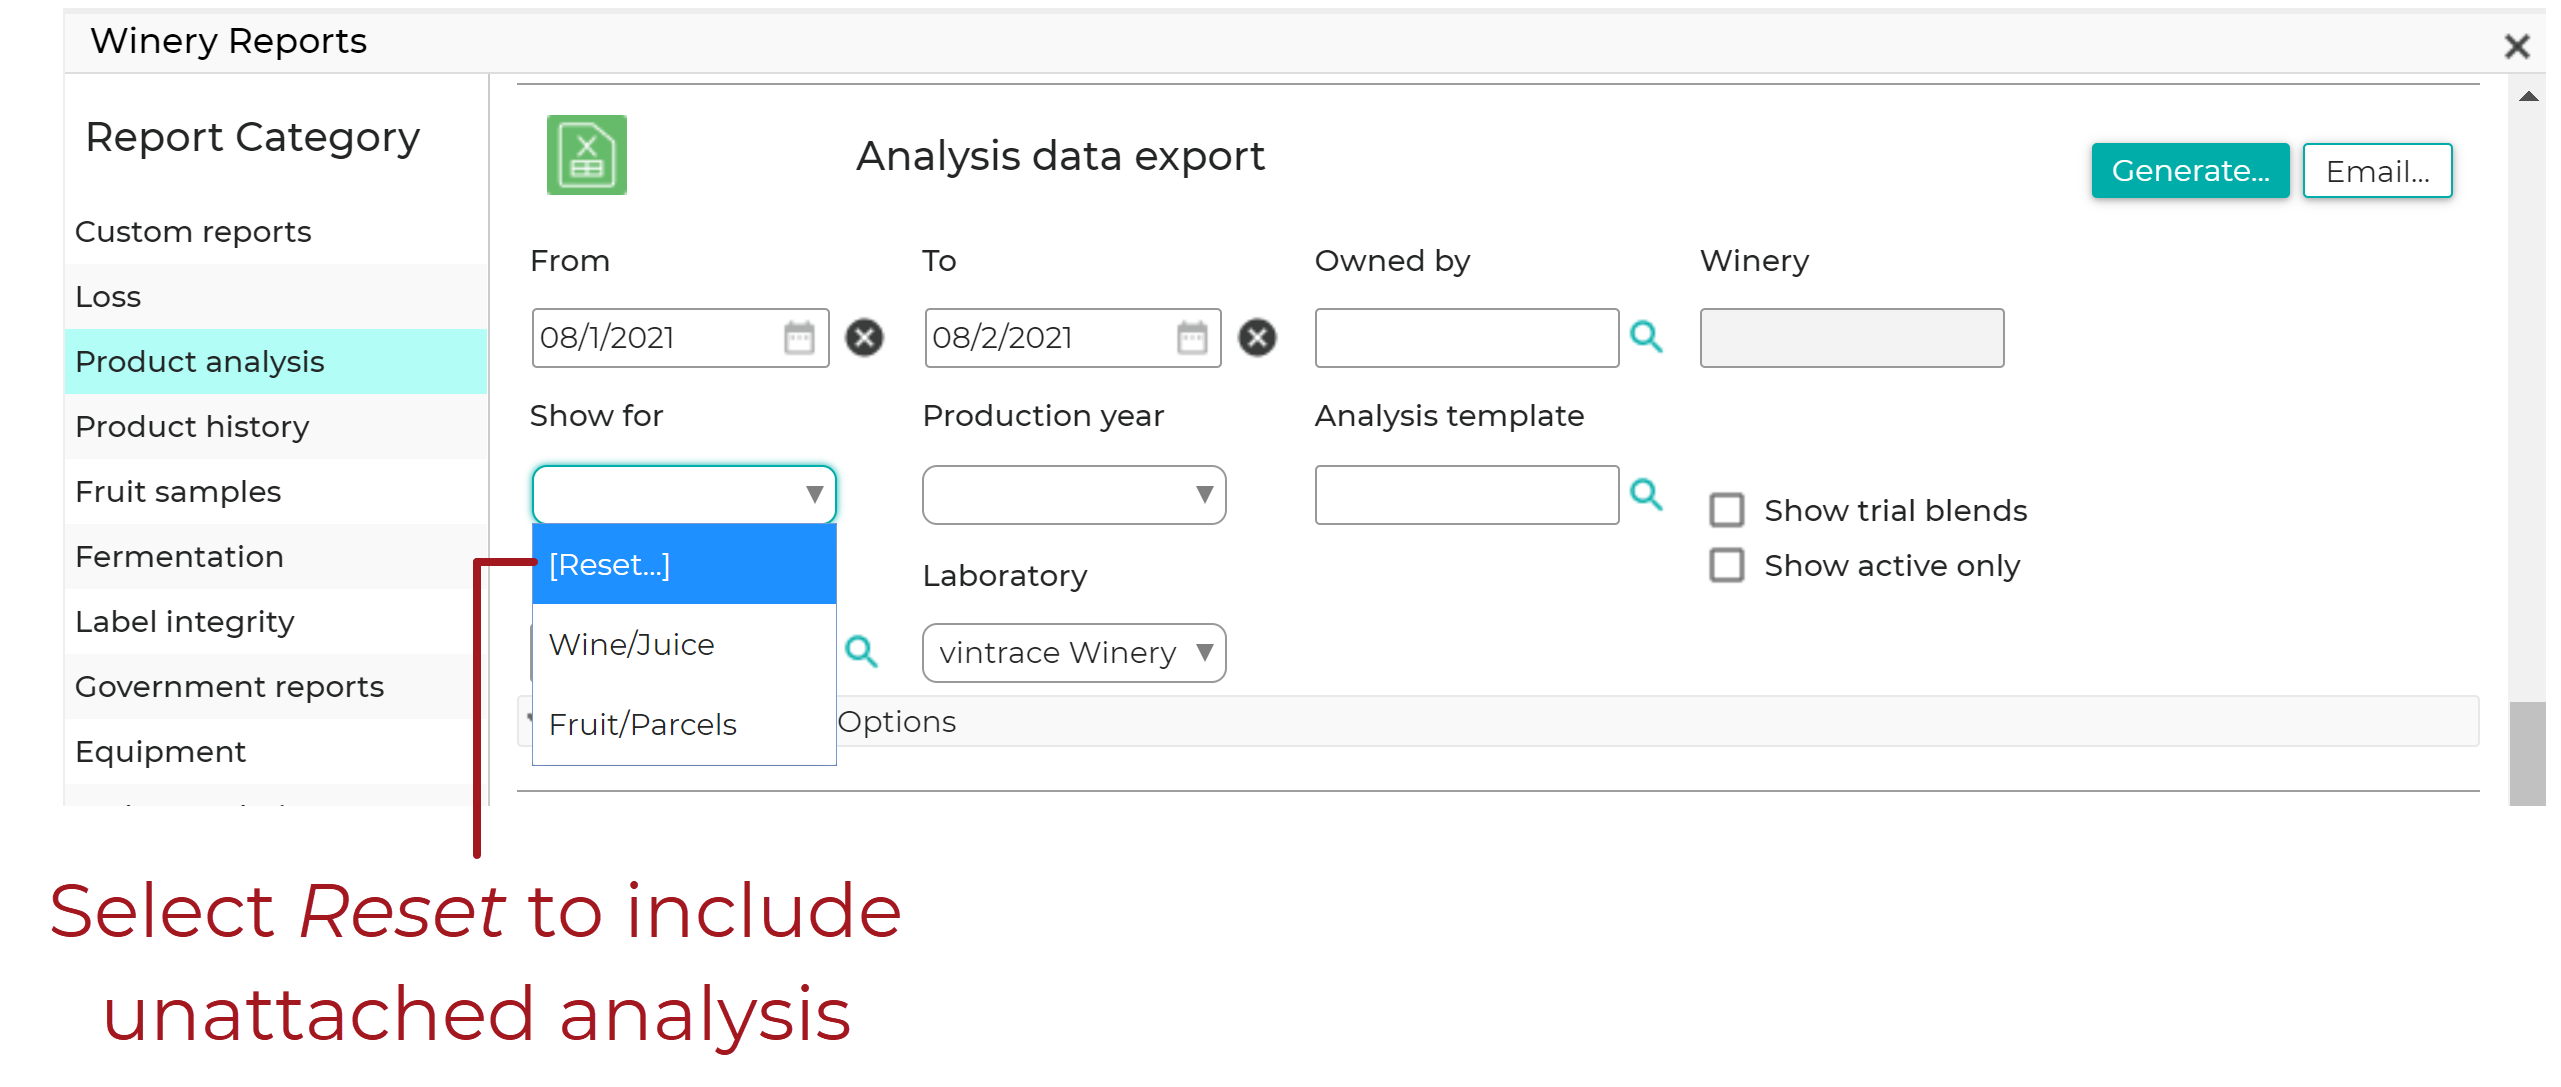 Winery_Reports_-_Analysis_Data_Export_20210810.png